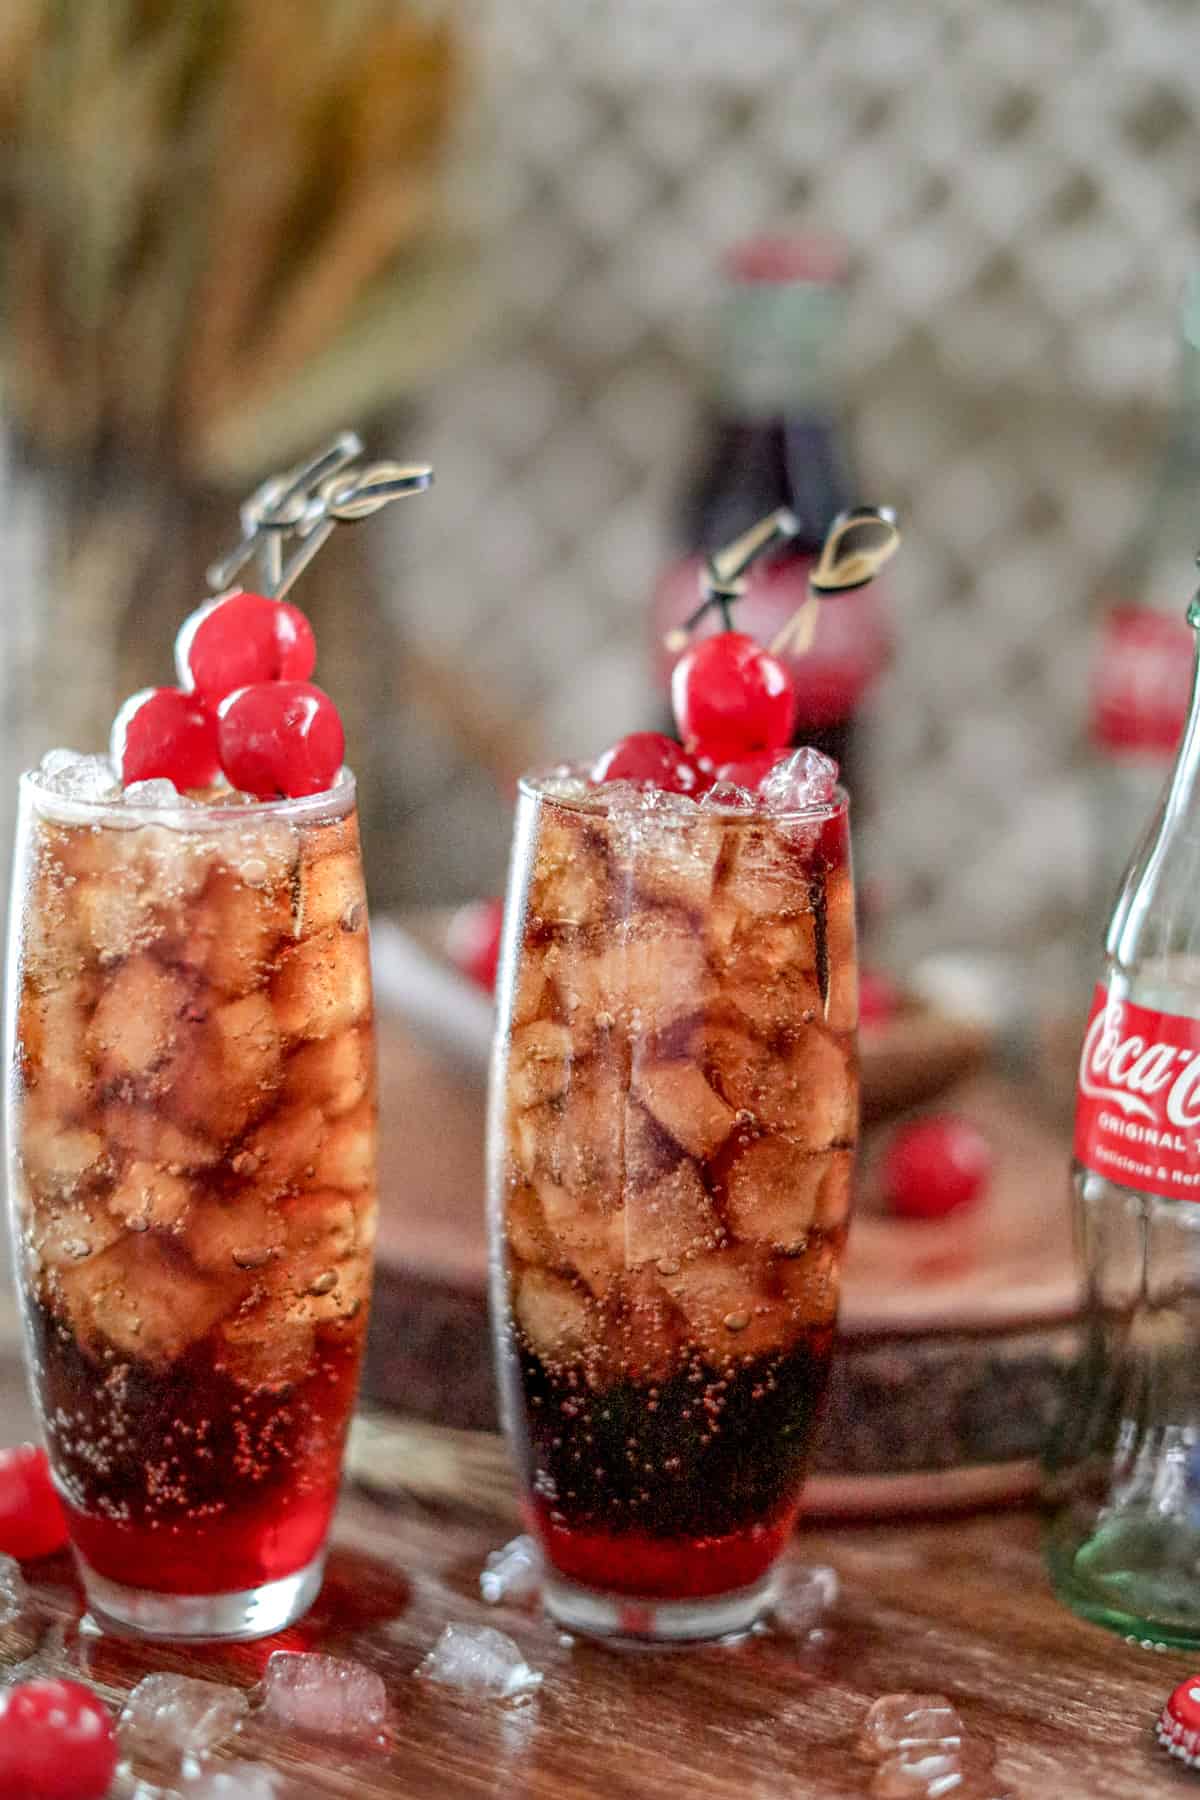 Two of the Roy Rogers Drink in tall glasses showing the ice and cherries on toothpicks.